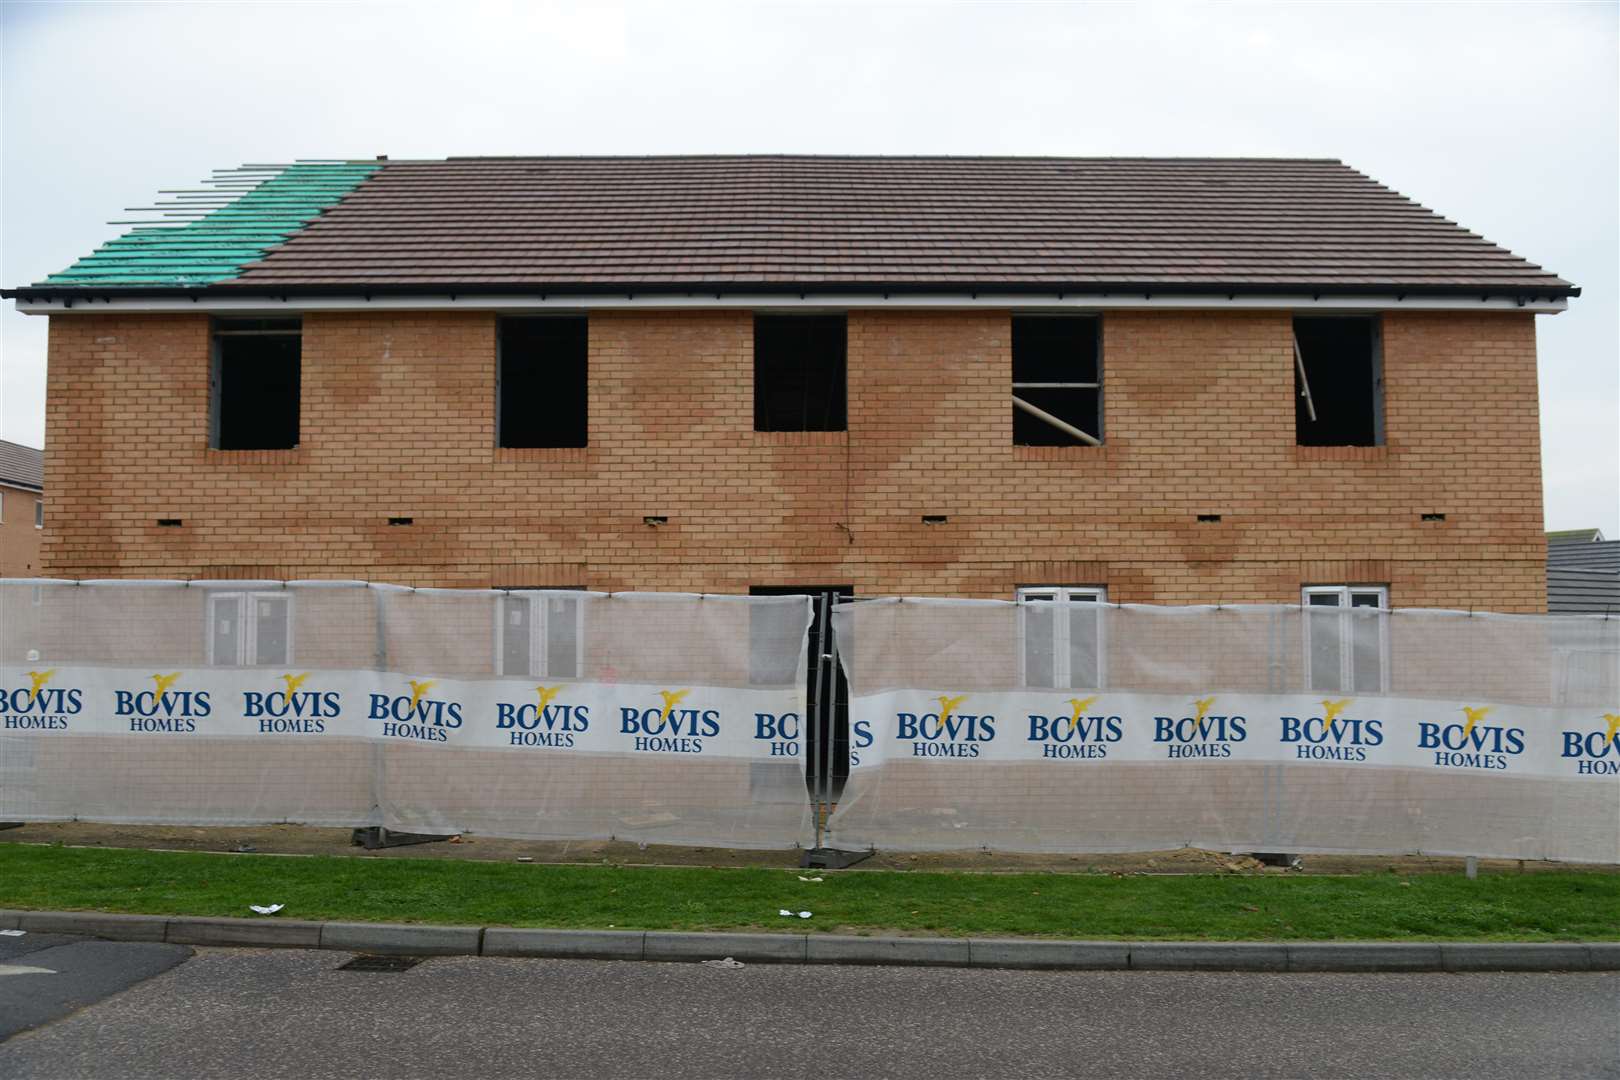 Bovis Homes is is hiking its dividend